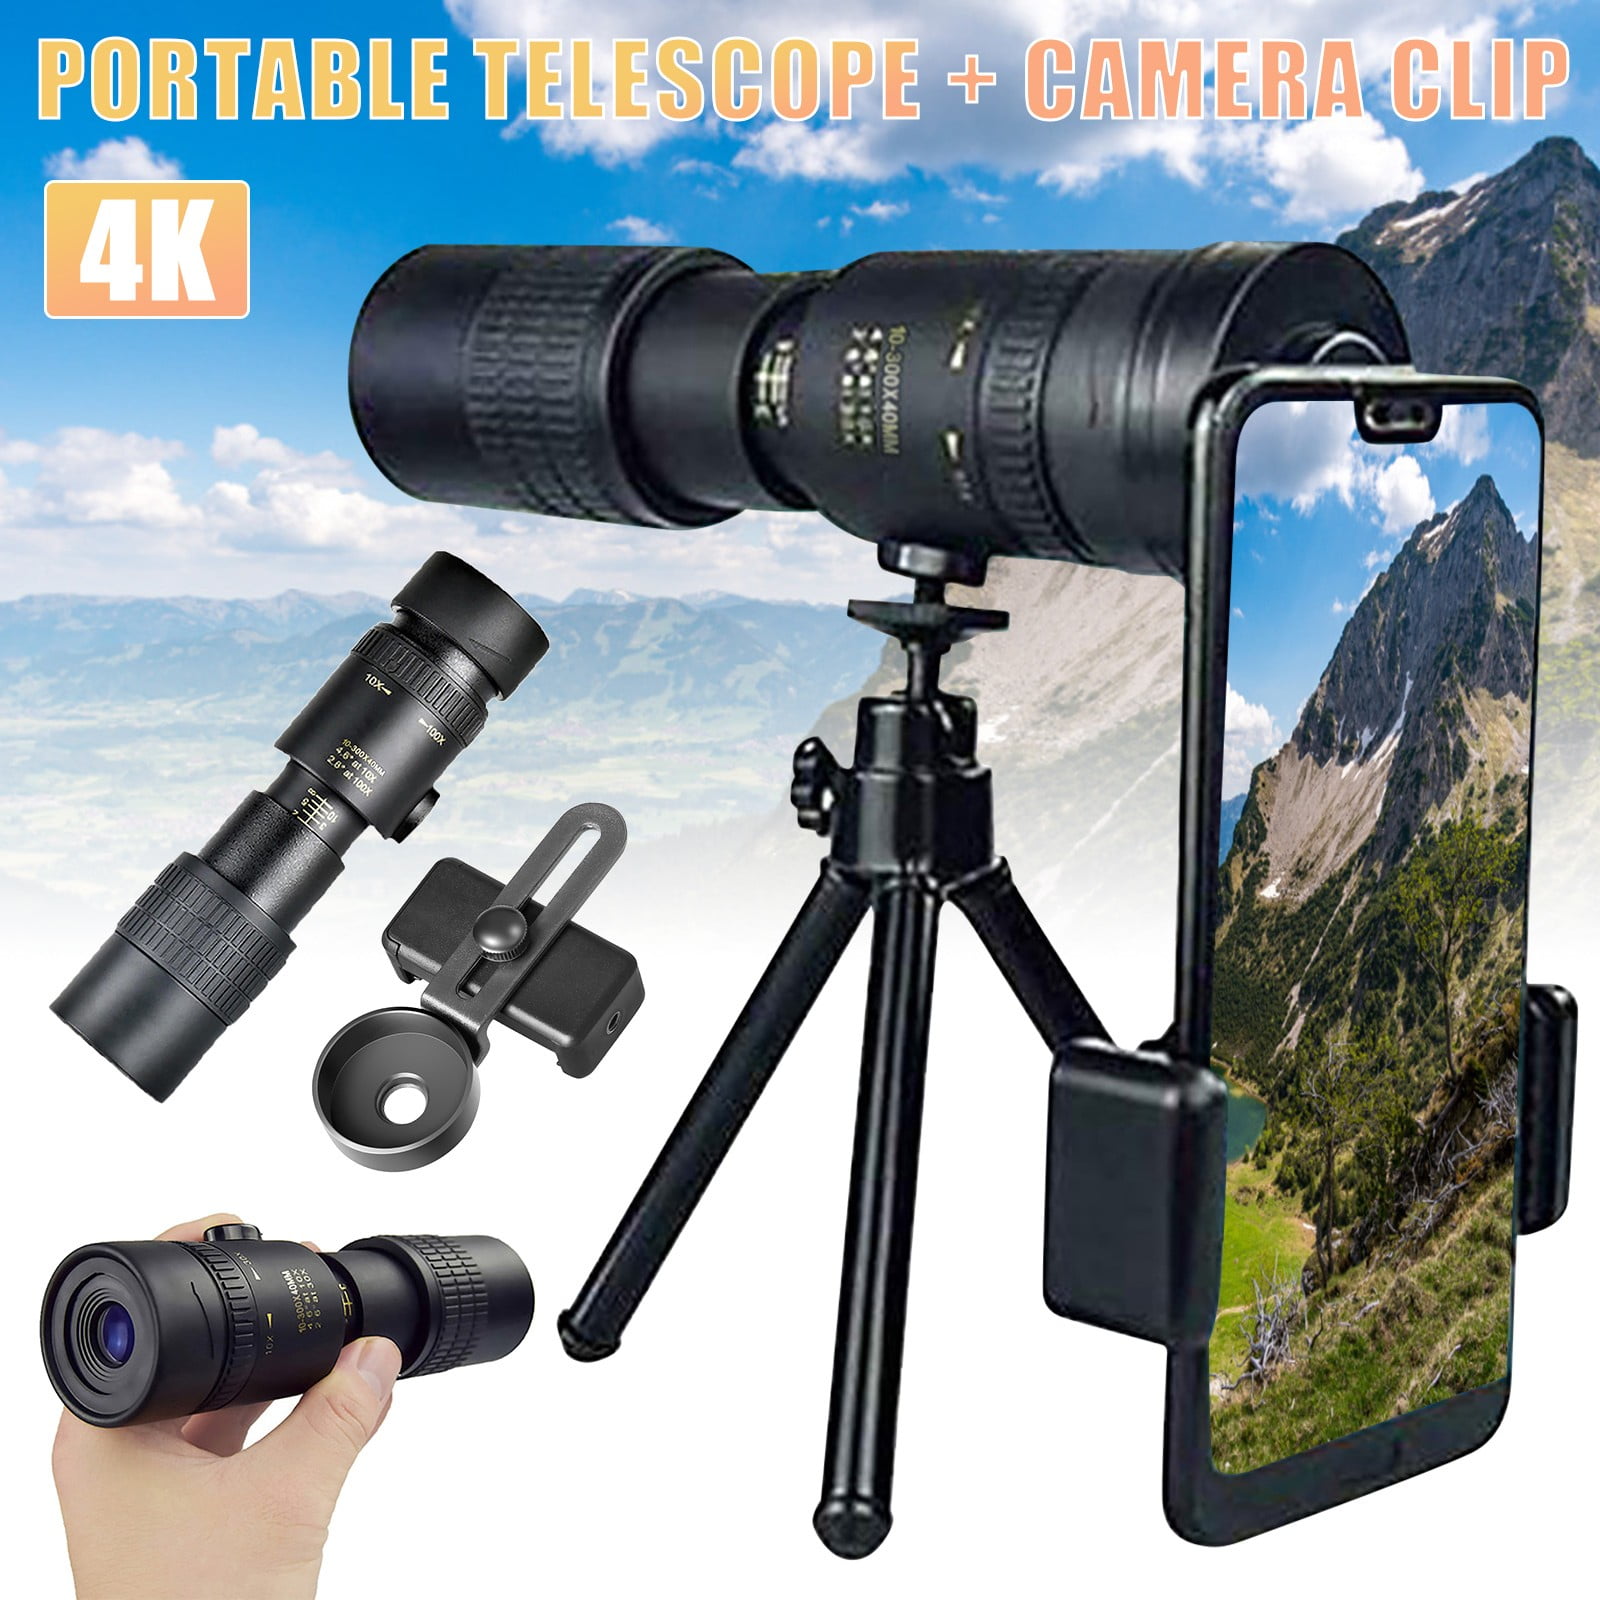 4K 10-300X40mm Super Telephoto Zoom Monocular Telescope Portable,US Stock 7-14days Delivered 